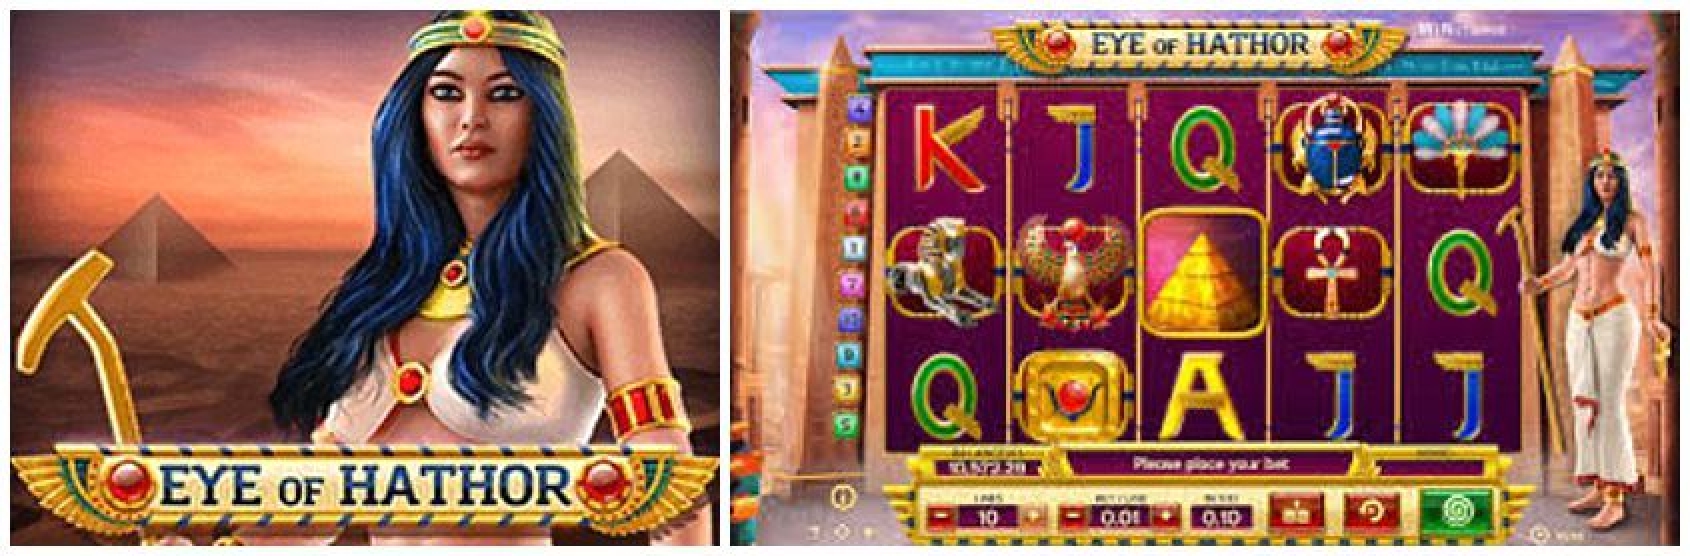 The Eye of Hathor Online Slot Demo Game by BwinParty